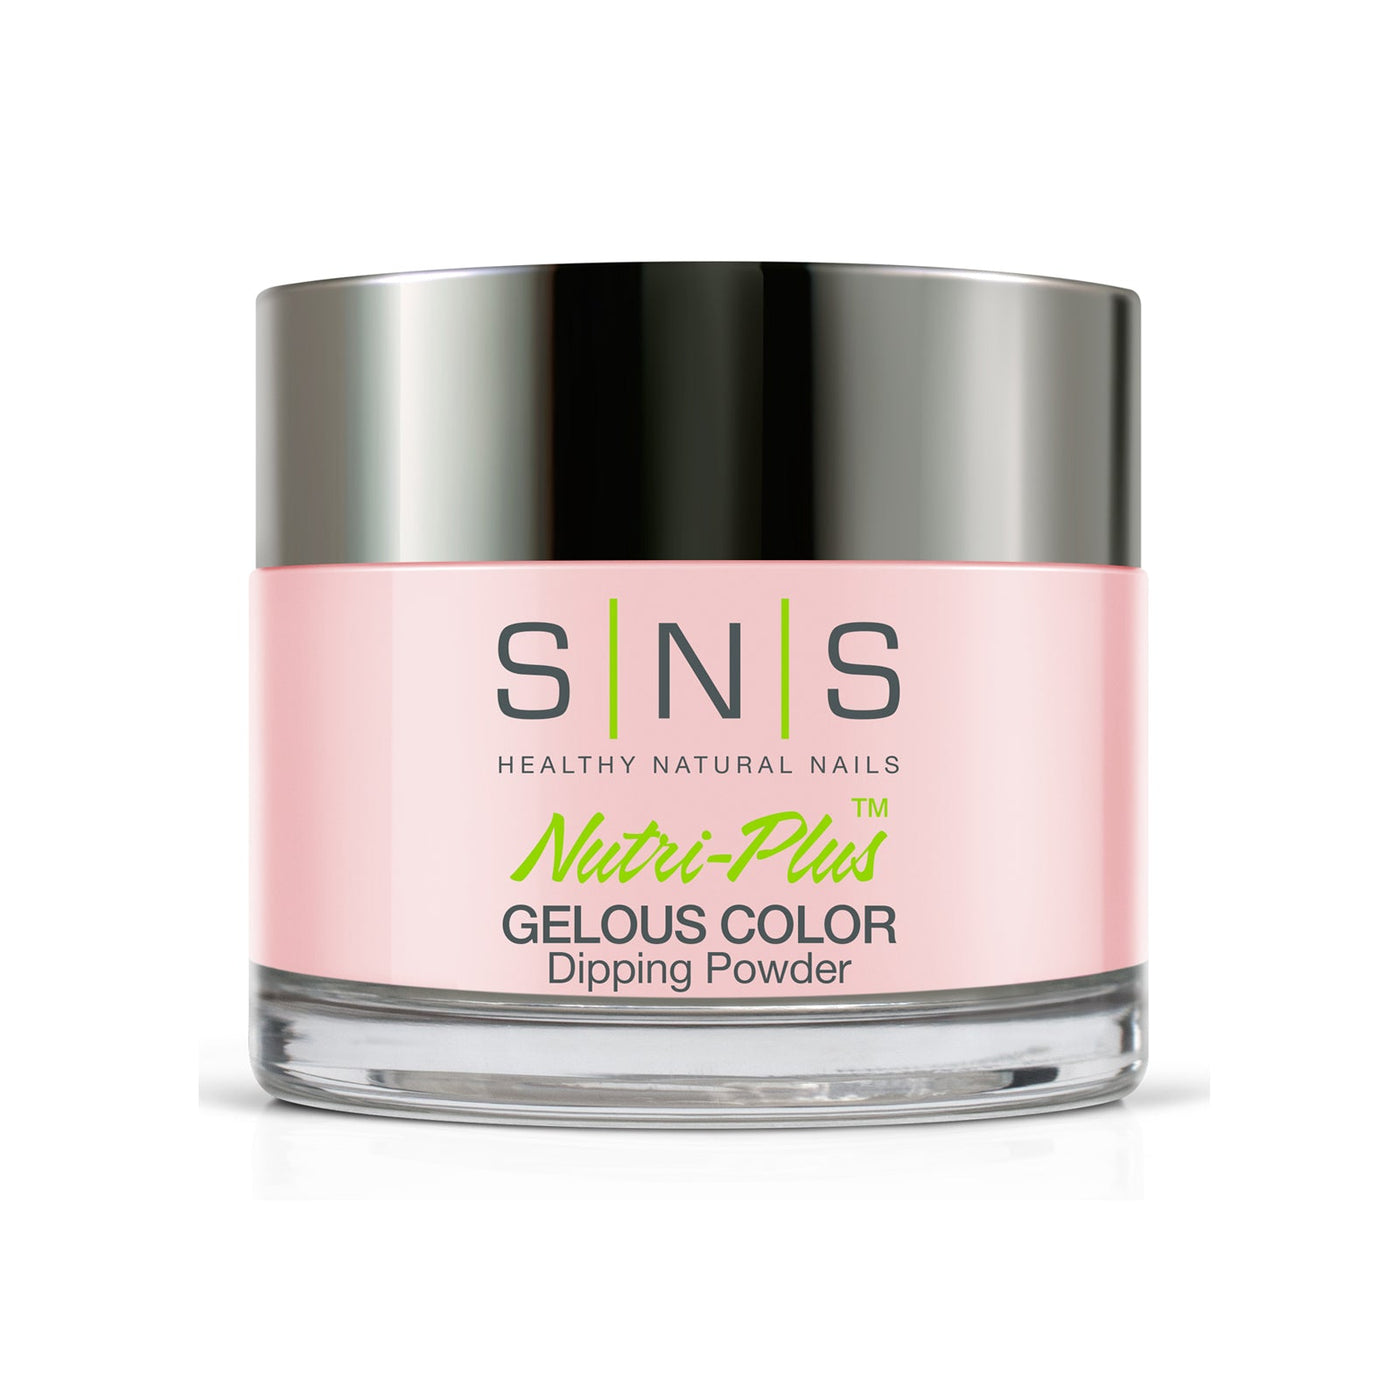 SNS Gelous Color Dipping Powder LV20 Oui Oui (43g) packaging